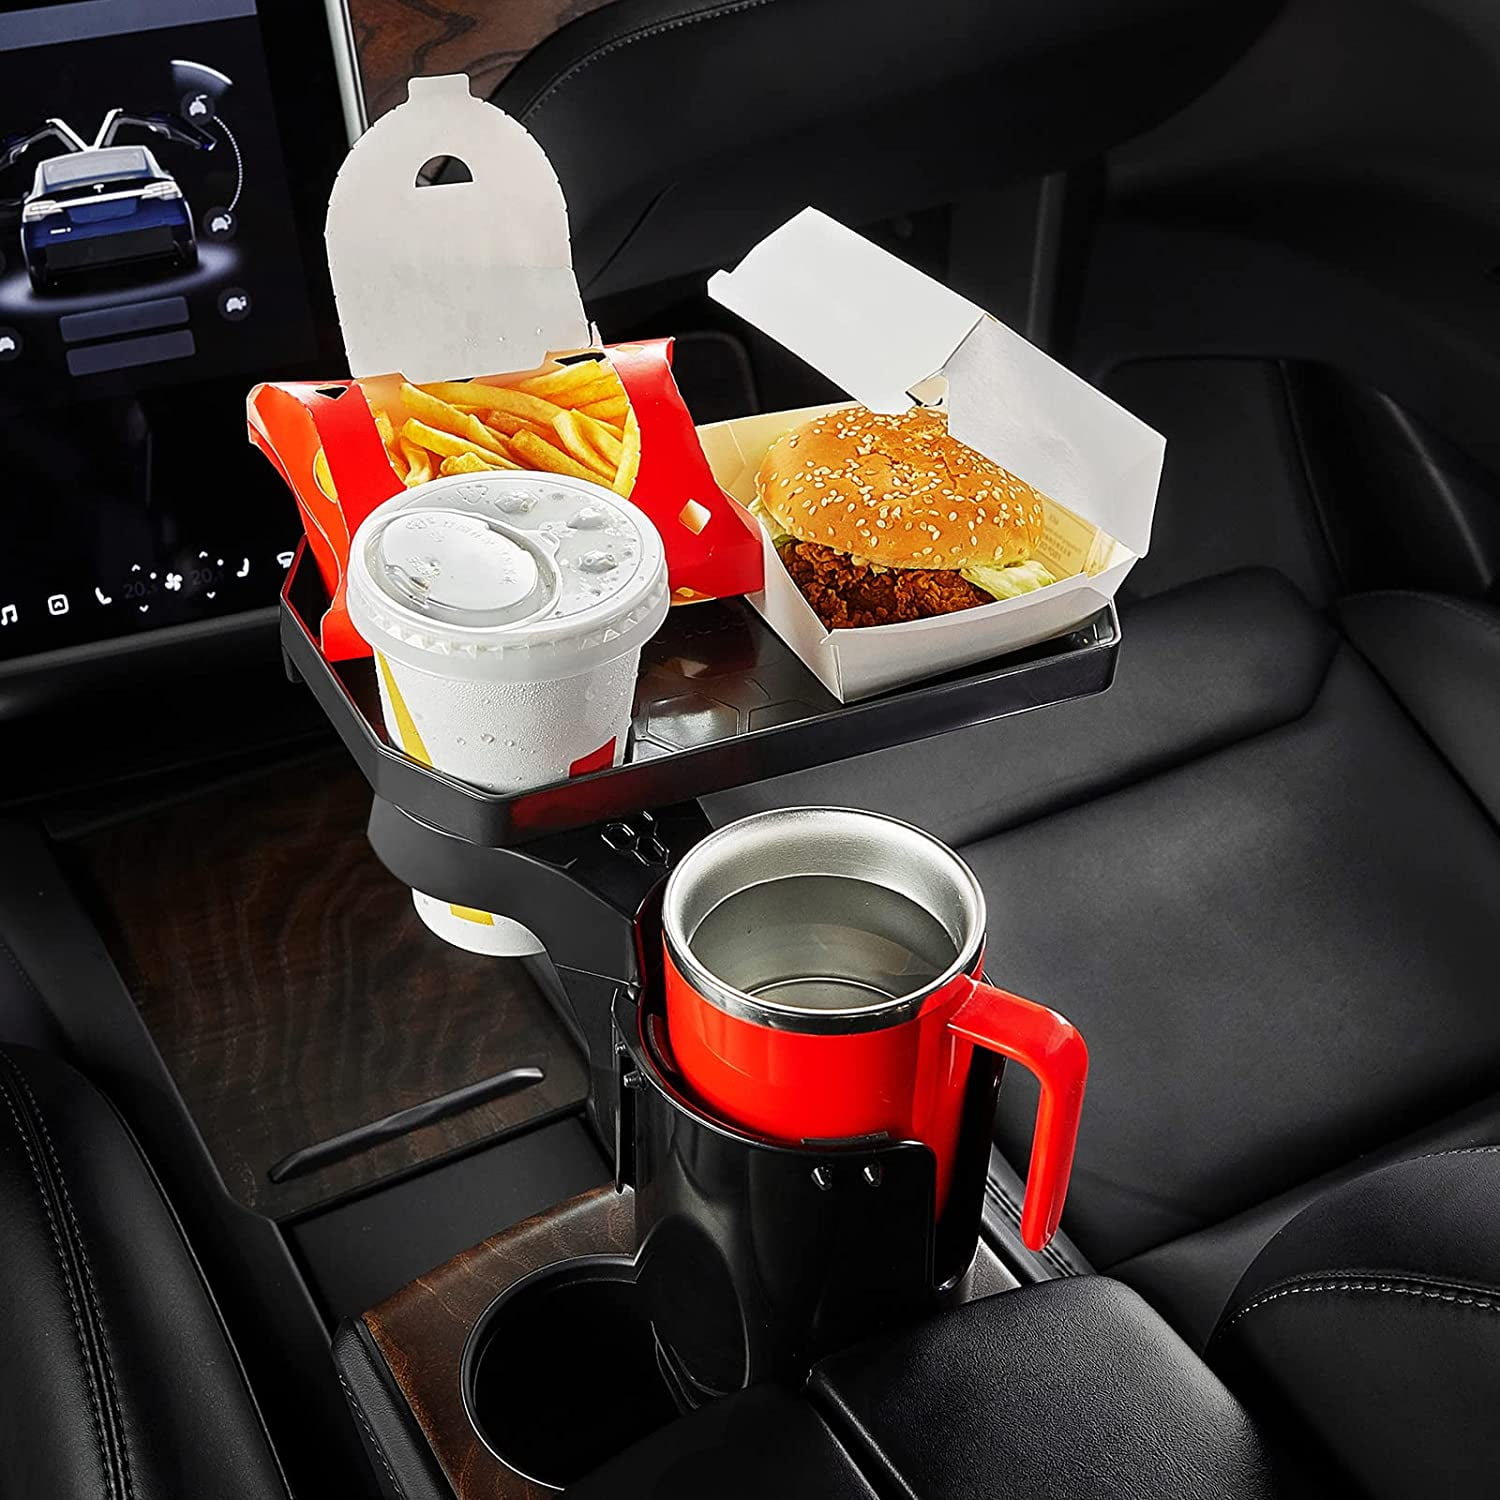 1Pc Multi-Purpose RV Car Cup Holder,Car Mounted Cup Holder,It Can Be Used  To Store Water Cups And Garbage, And Is Suitable For Travel And Business  Trips.